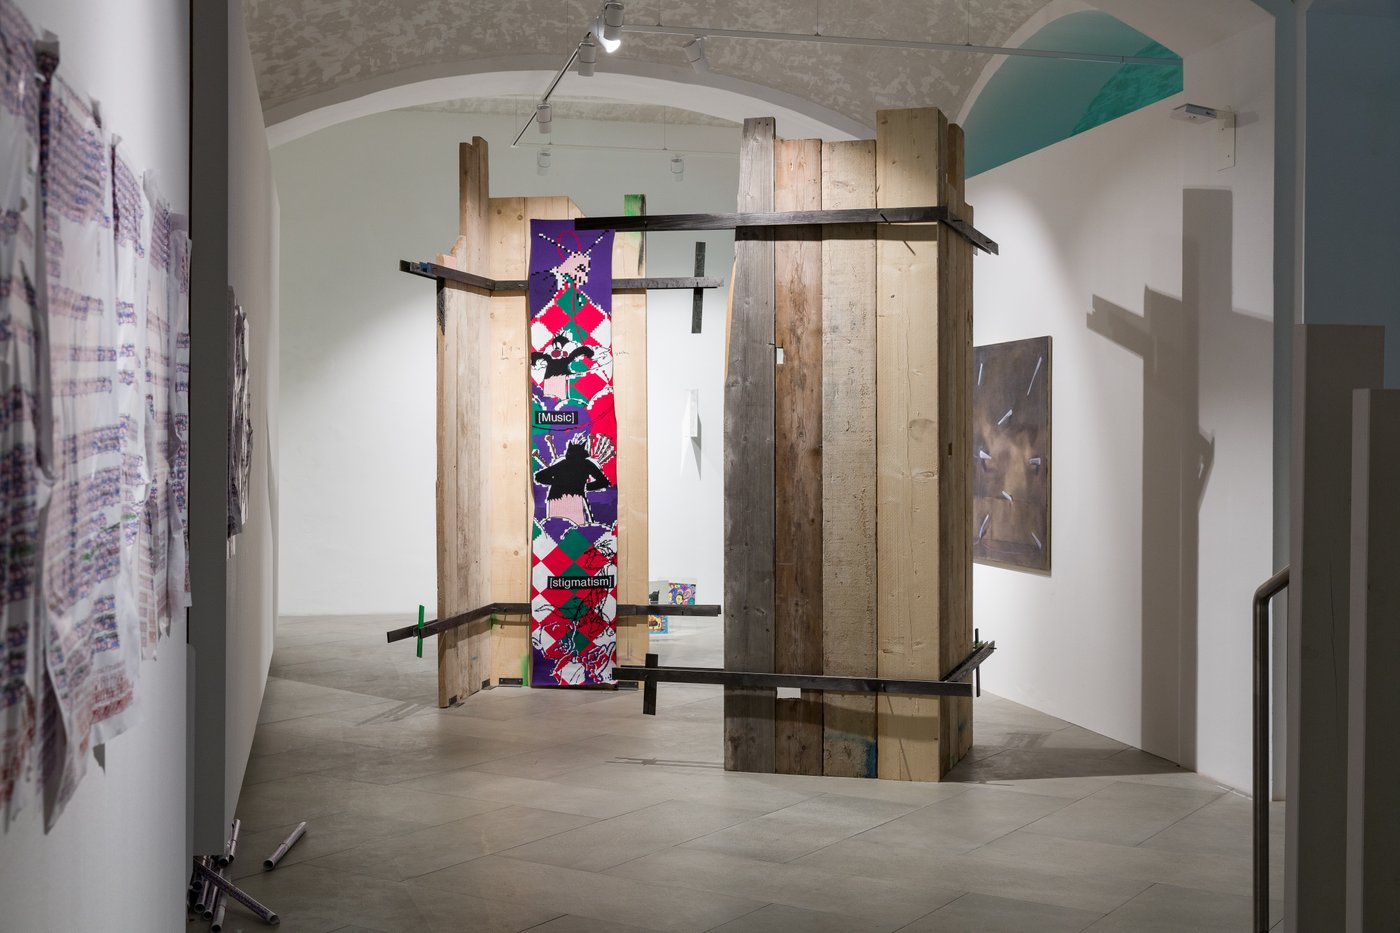 In the room there are two wooden sculptures made of planks, each forming a kind of corner of the room and facing each other. Inside one of the corners hangs a purple, red, green, white banner with the inscription "music", "Stigmatism".